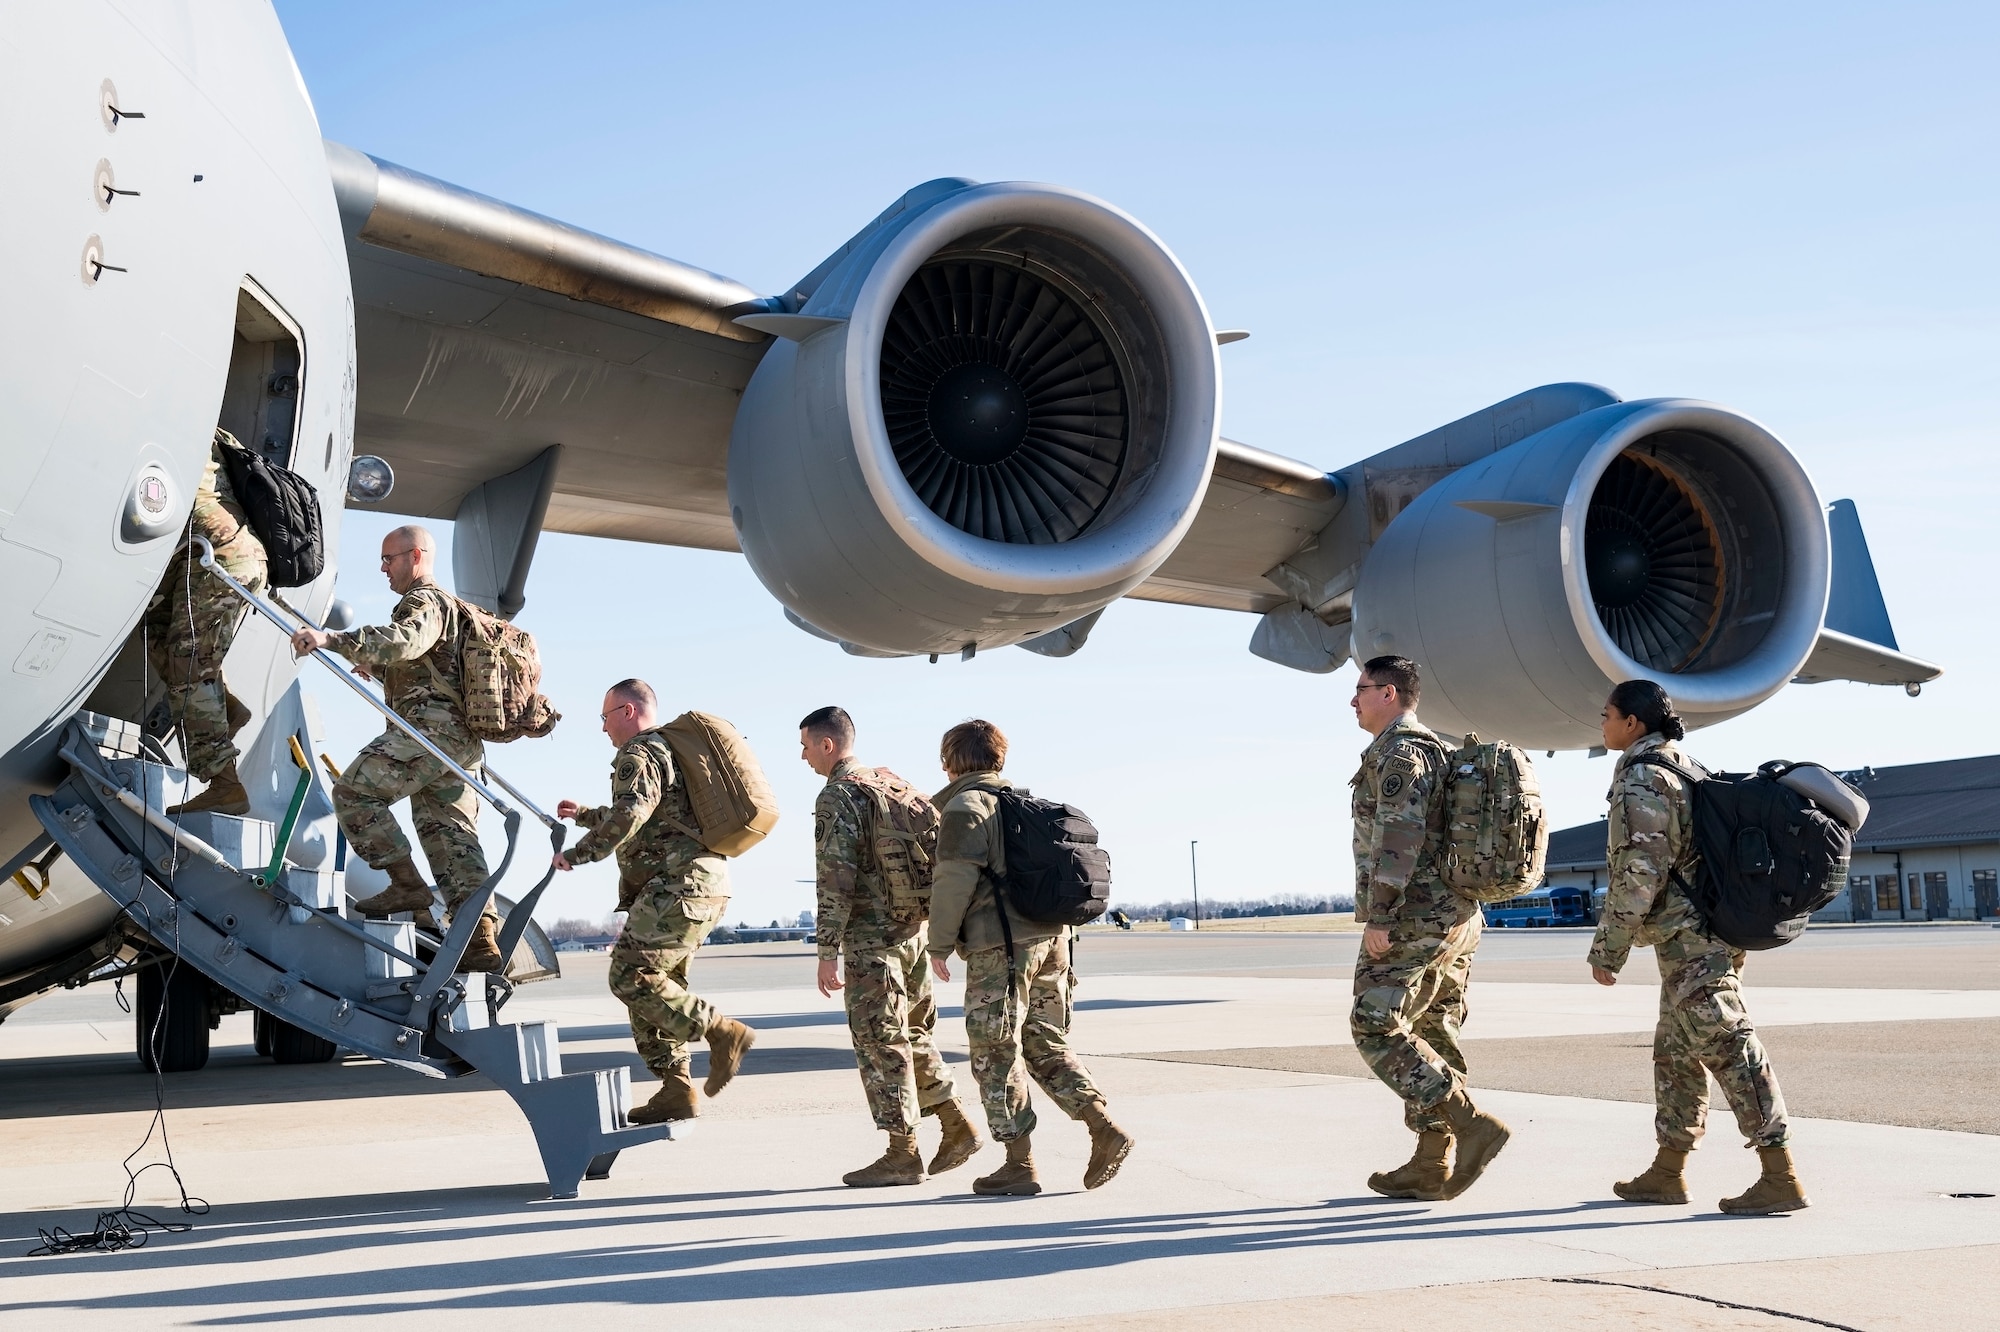 Personnel from the Delaware National Guard's 31st Civil Support Team, Weapons of Mass Destruction headquartered in Smyrna, Del., board a C-17 Globemaster III Jan. 11, 2019, at Dover Air Force Base, Del. Five vehicles and team members were being airlifted to Florida to support the Florida National Guard during a large-scale training exercise Jan. 14-18. The 31st CST maintains the capability to mitigate the consequences of any WMD or Nuclear, Biological, and Chemical event, whether natural or man-made. They are experts in WMD effects and NBC defense operations. The C-17 was from the 105th Airlift Wing, Stewart Air National Guard Base, Newburgh, N.Y., supported by a 137th Airlift Squadron aircrew. (U.S. Air Force photo by Roland Balik)